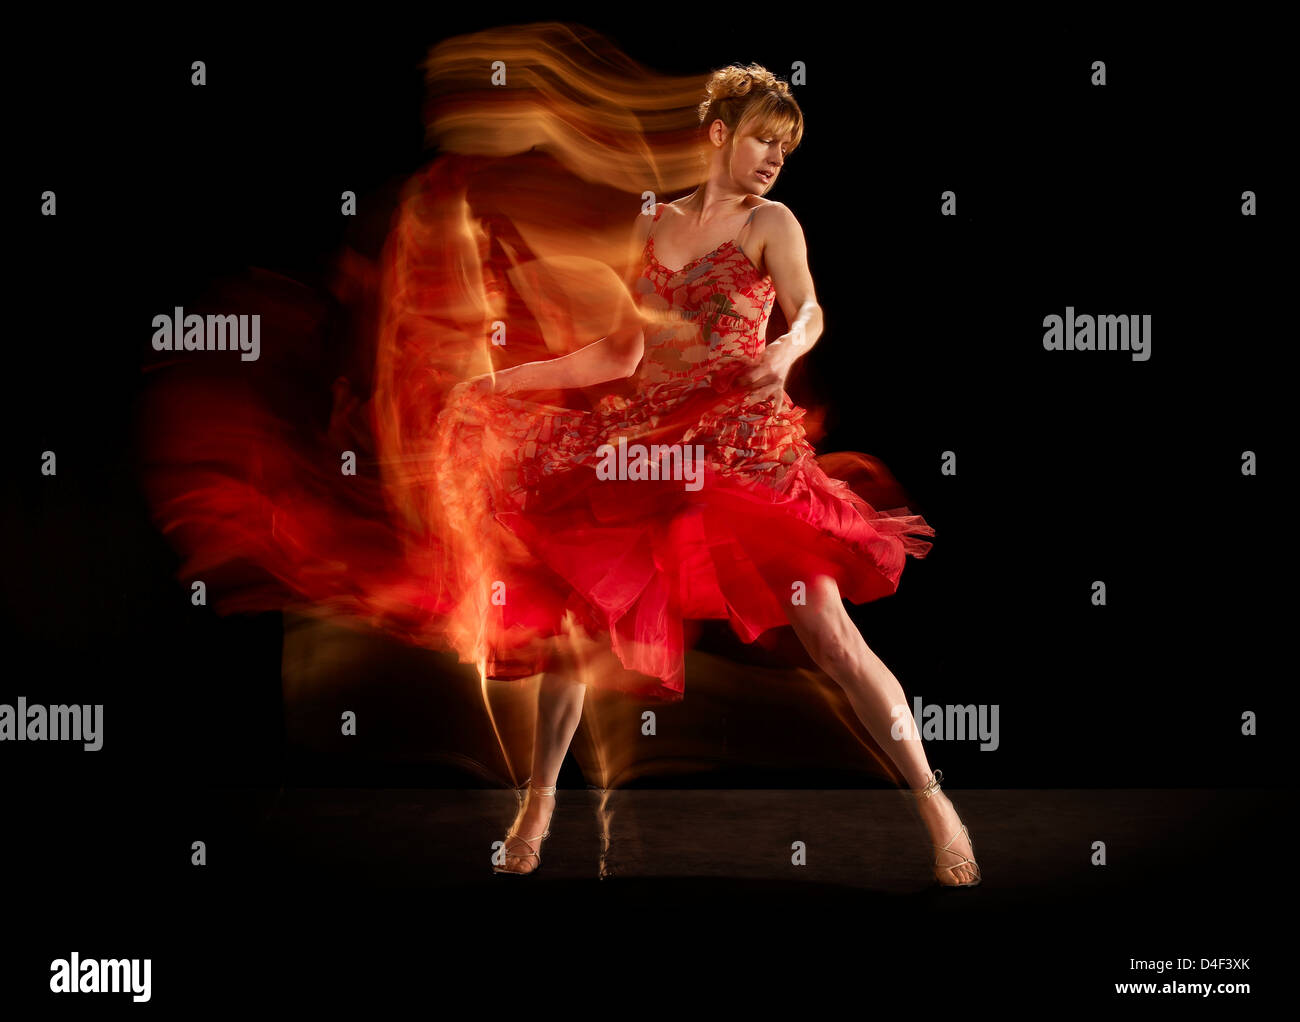 Time lapse view of dancer twirling Stock Photo